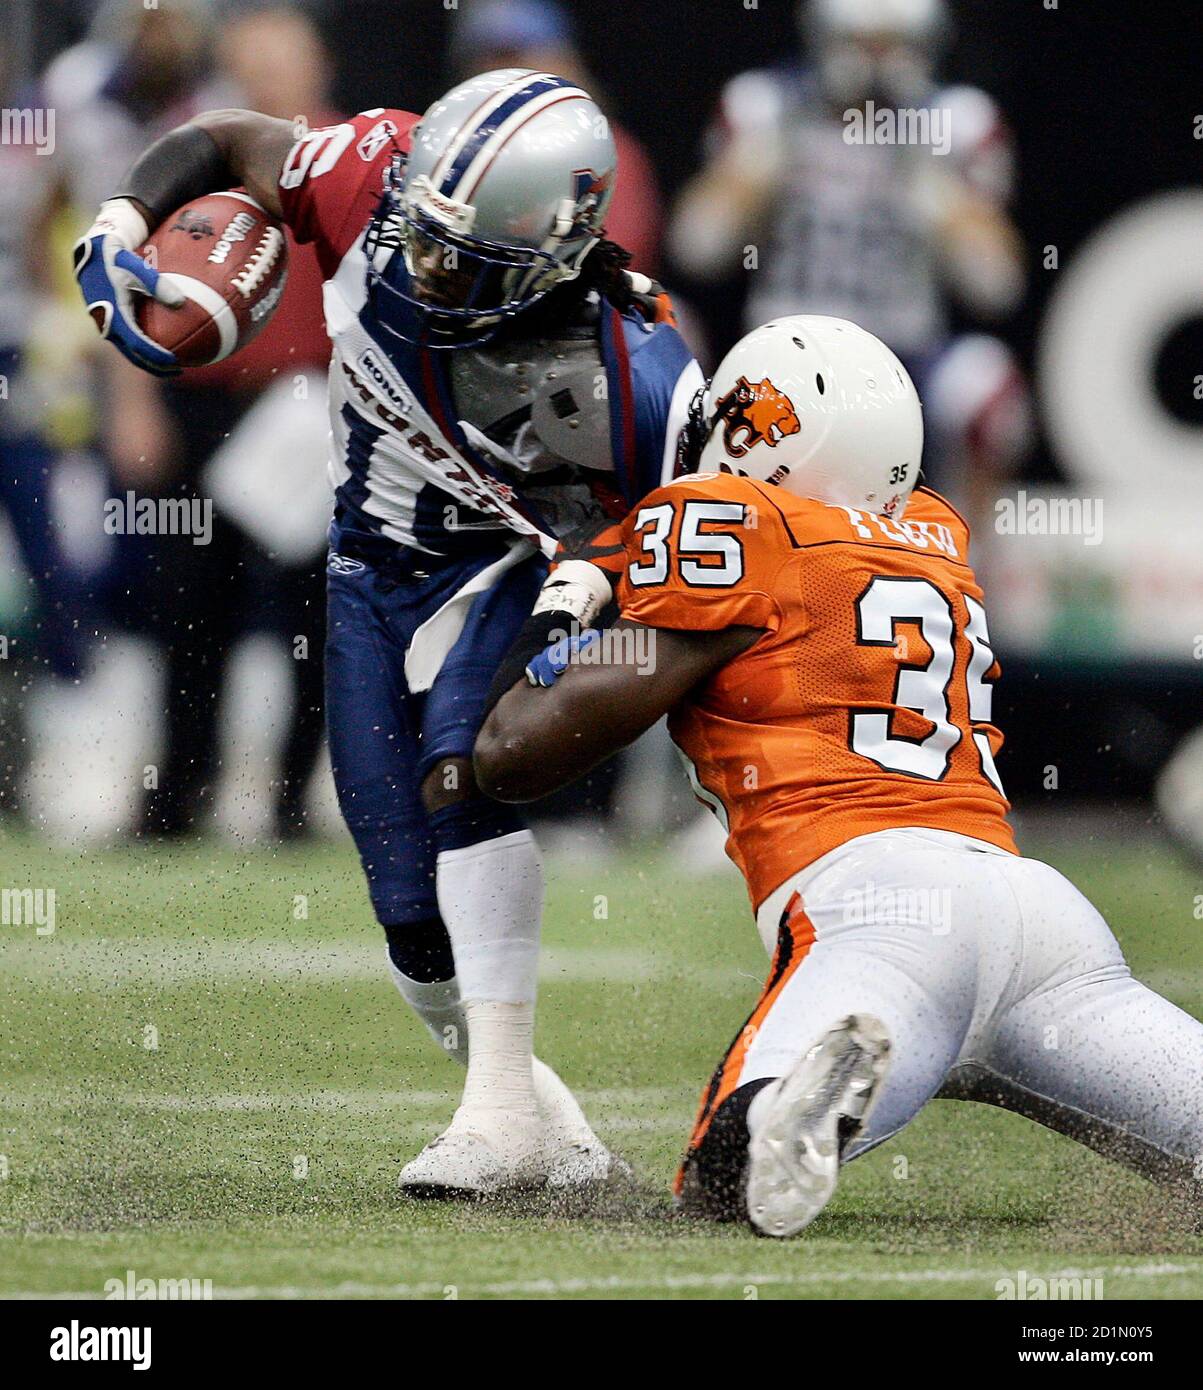 BC Lions linebacker Otis Floyd (R) grabs a hold of Montreal Alouettes' slotback Ezra Landry's sweater while trying to tackle him during first half Canadian Football League play in Vancouver, British Columbia, September 17, 2005. REUTERS/Andy Clark  AC/PN Stock Photo